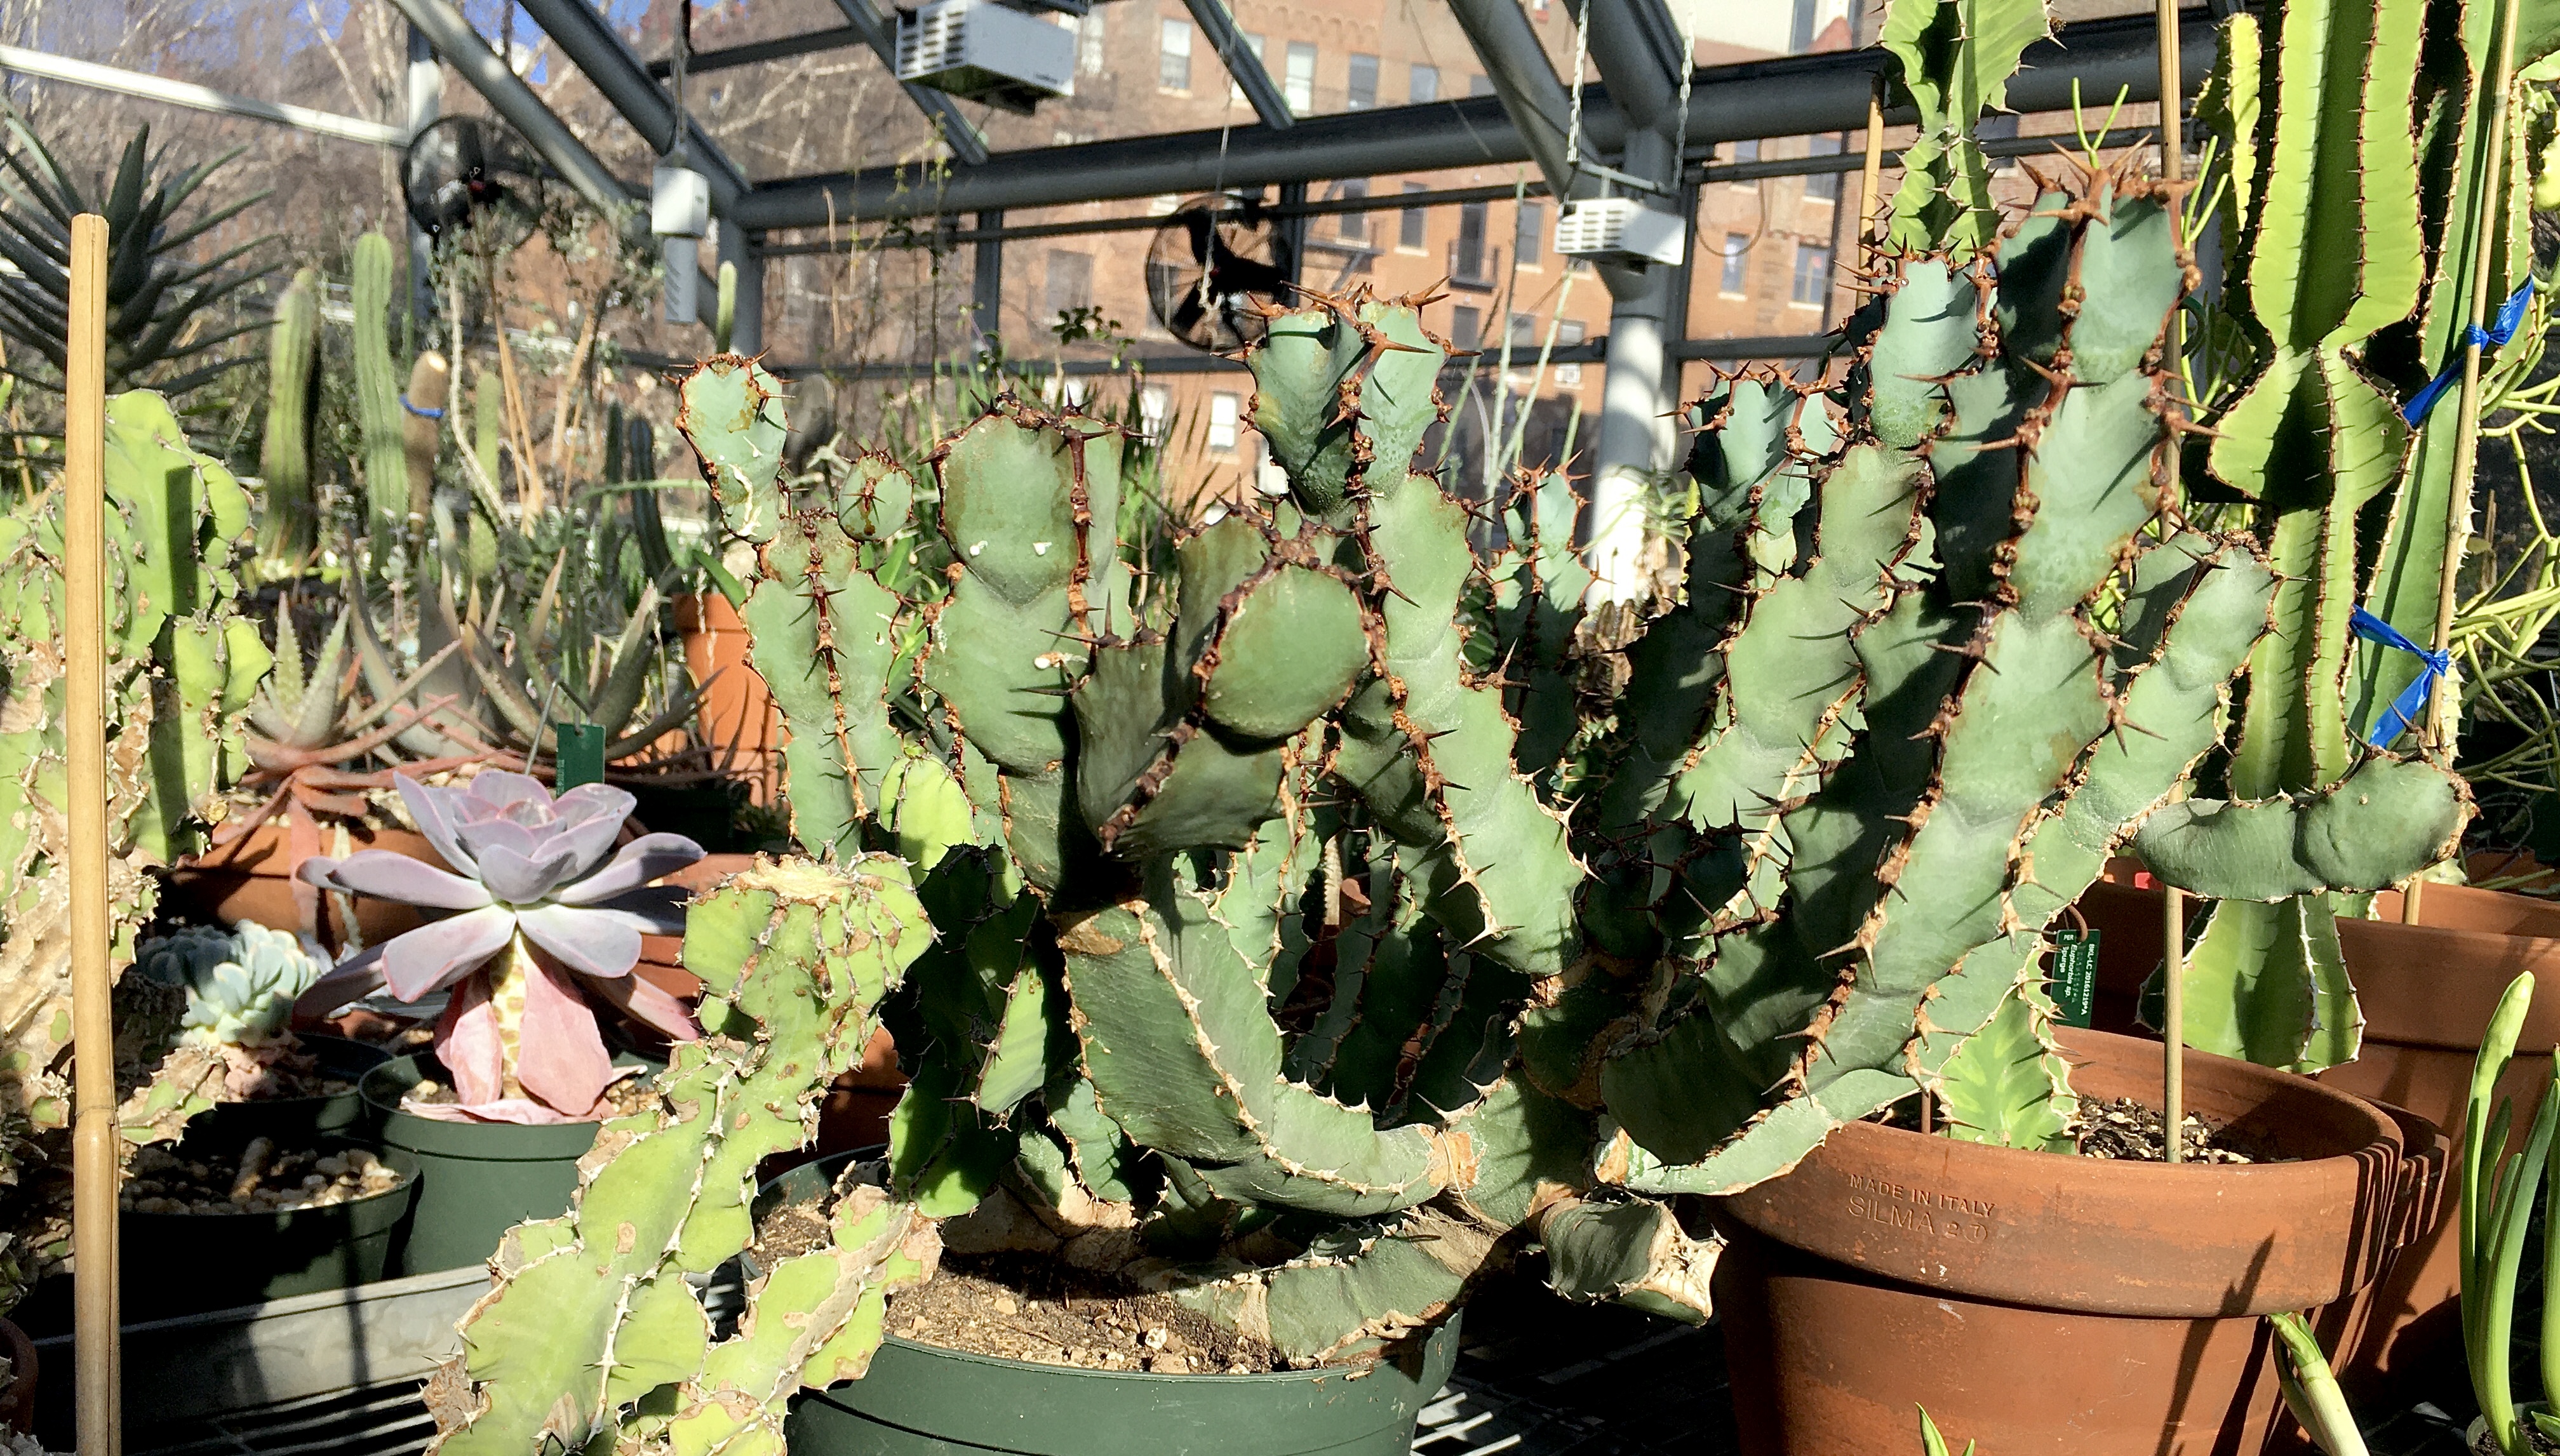 Cacti flourish in a growing room at Brooklyn Botanic Garden that’s off limits to the public. Photo: Lore Croghan/Brooklyn Eagle